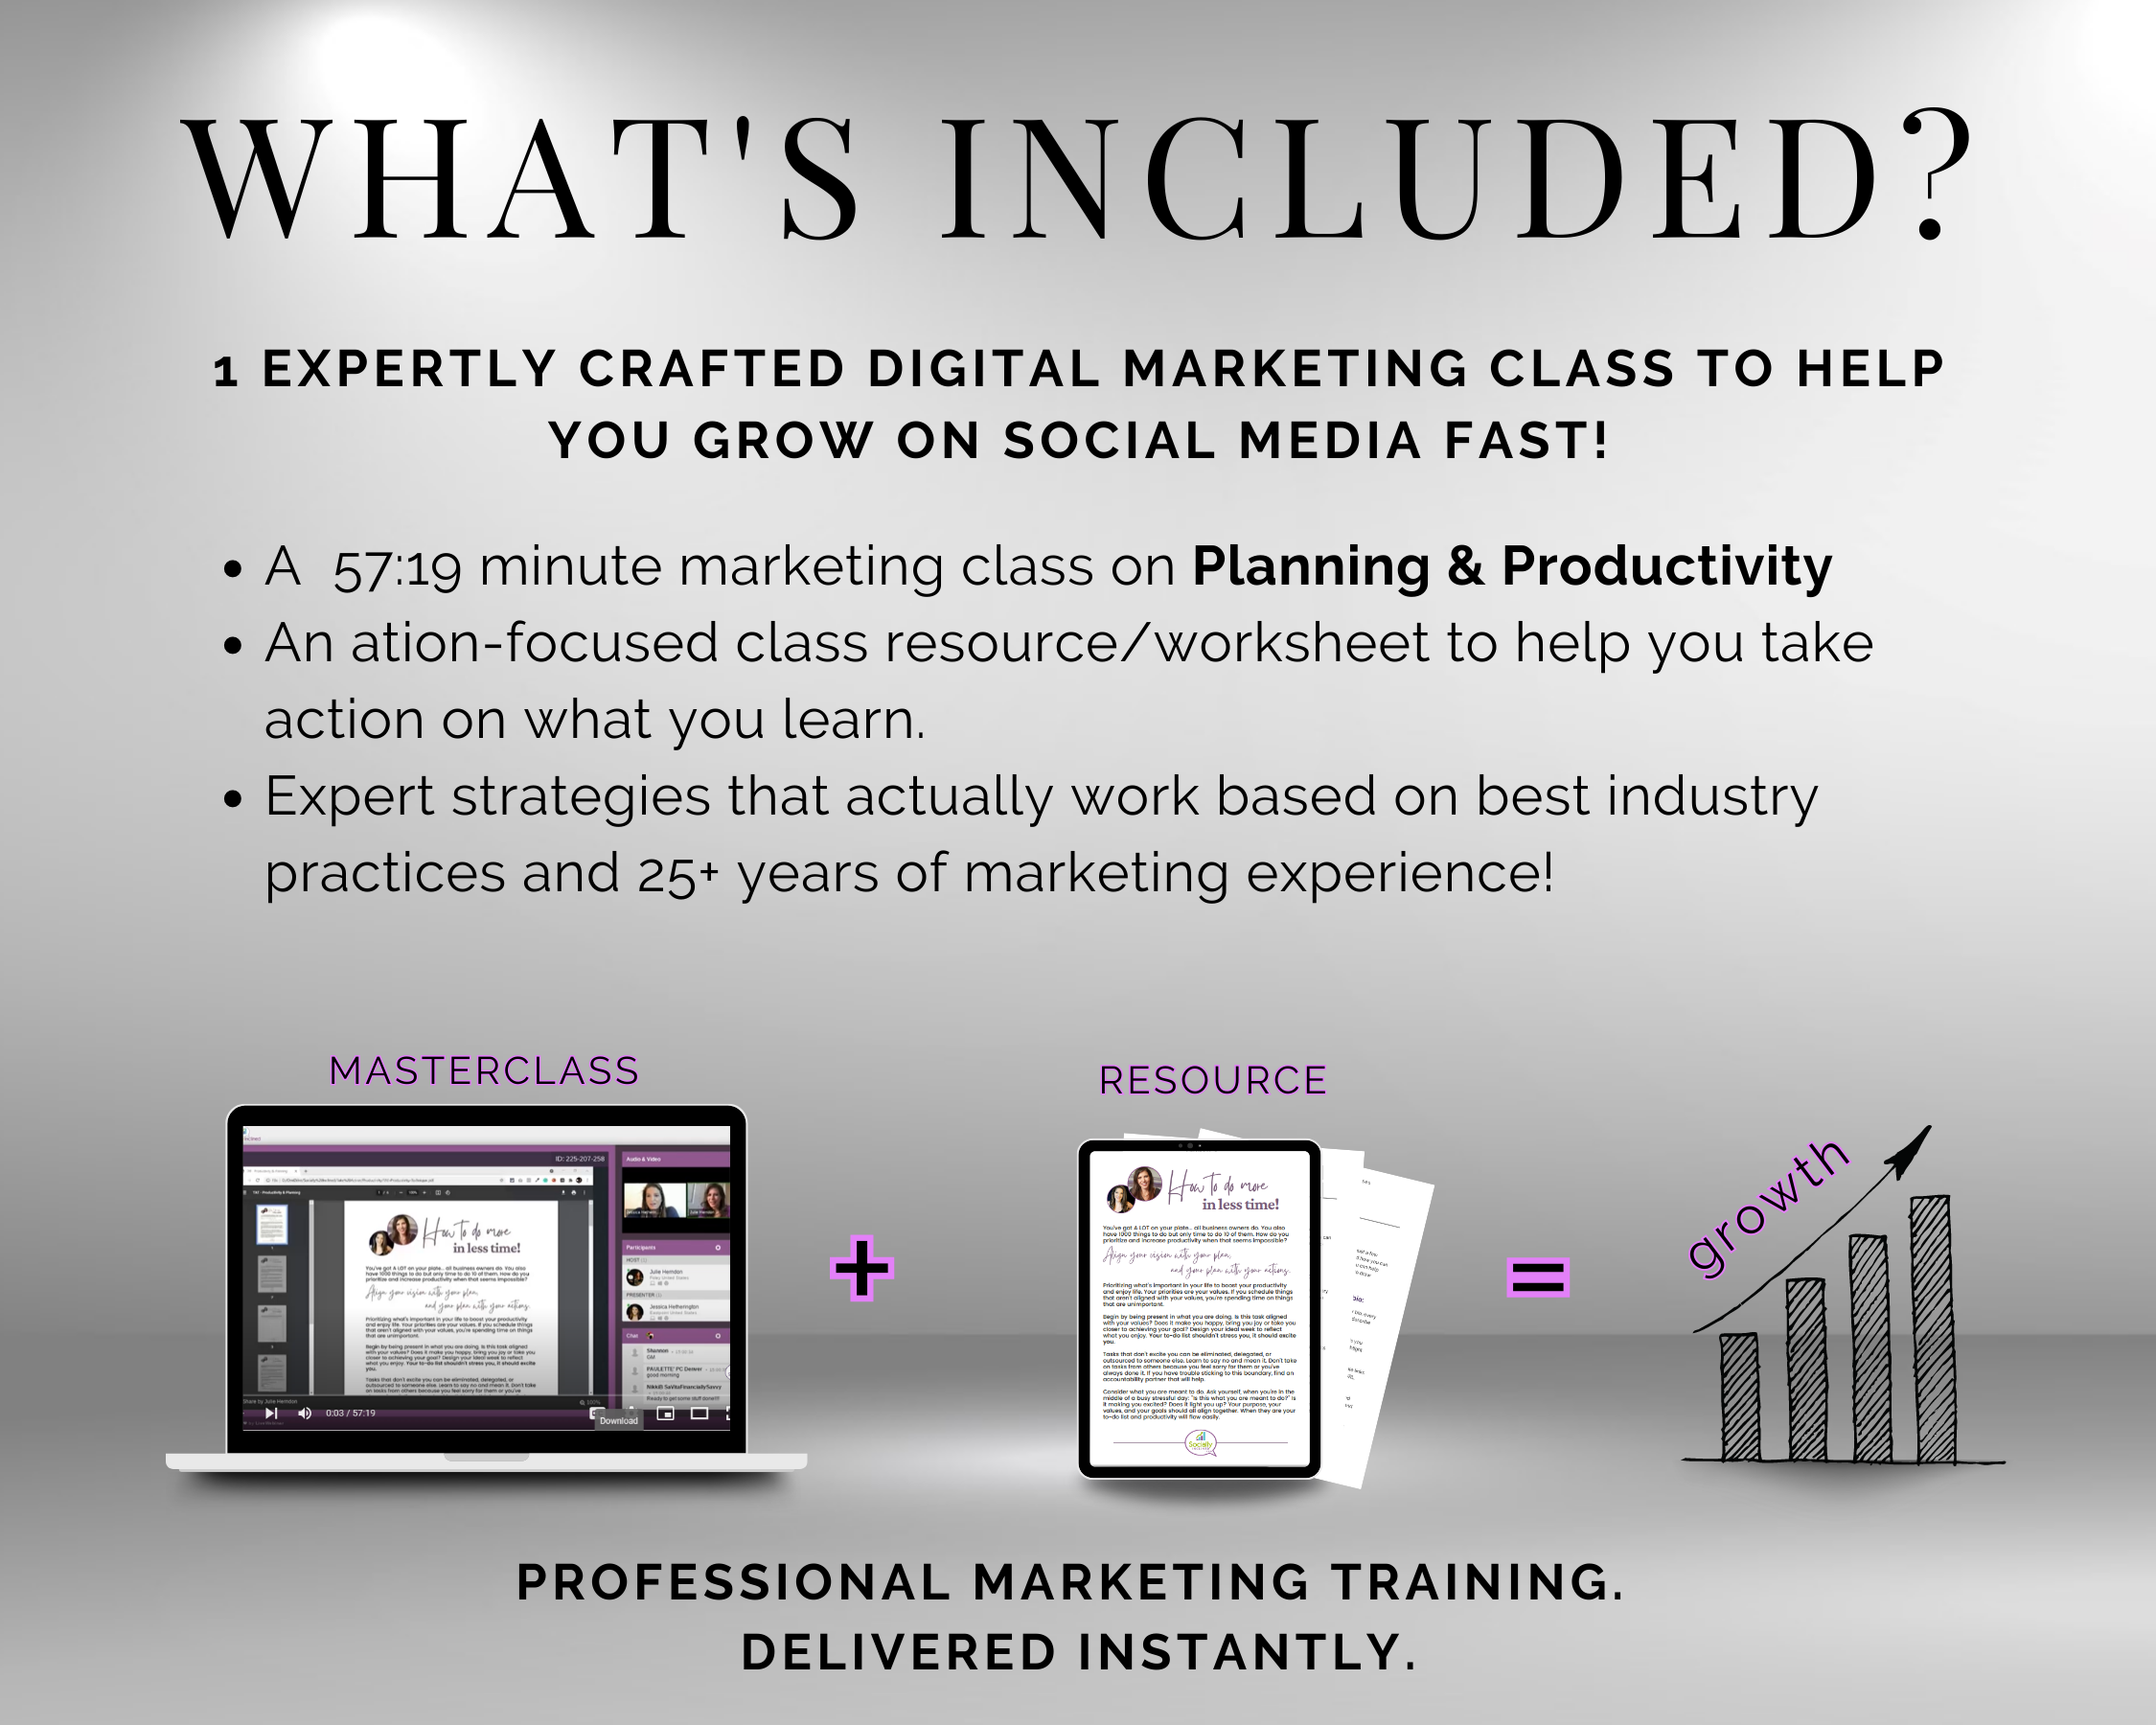 The TAT - Planning & Productivity Masterclass by Get Socially Inclined is included in the class curriculum for digital marketing, which encompasses the essential techniques and strategies used to drive online success.